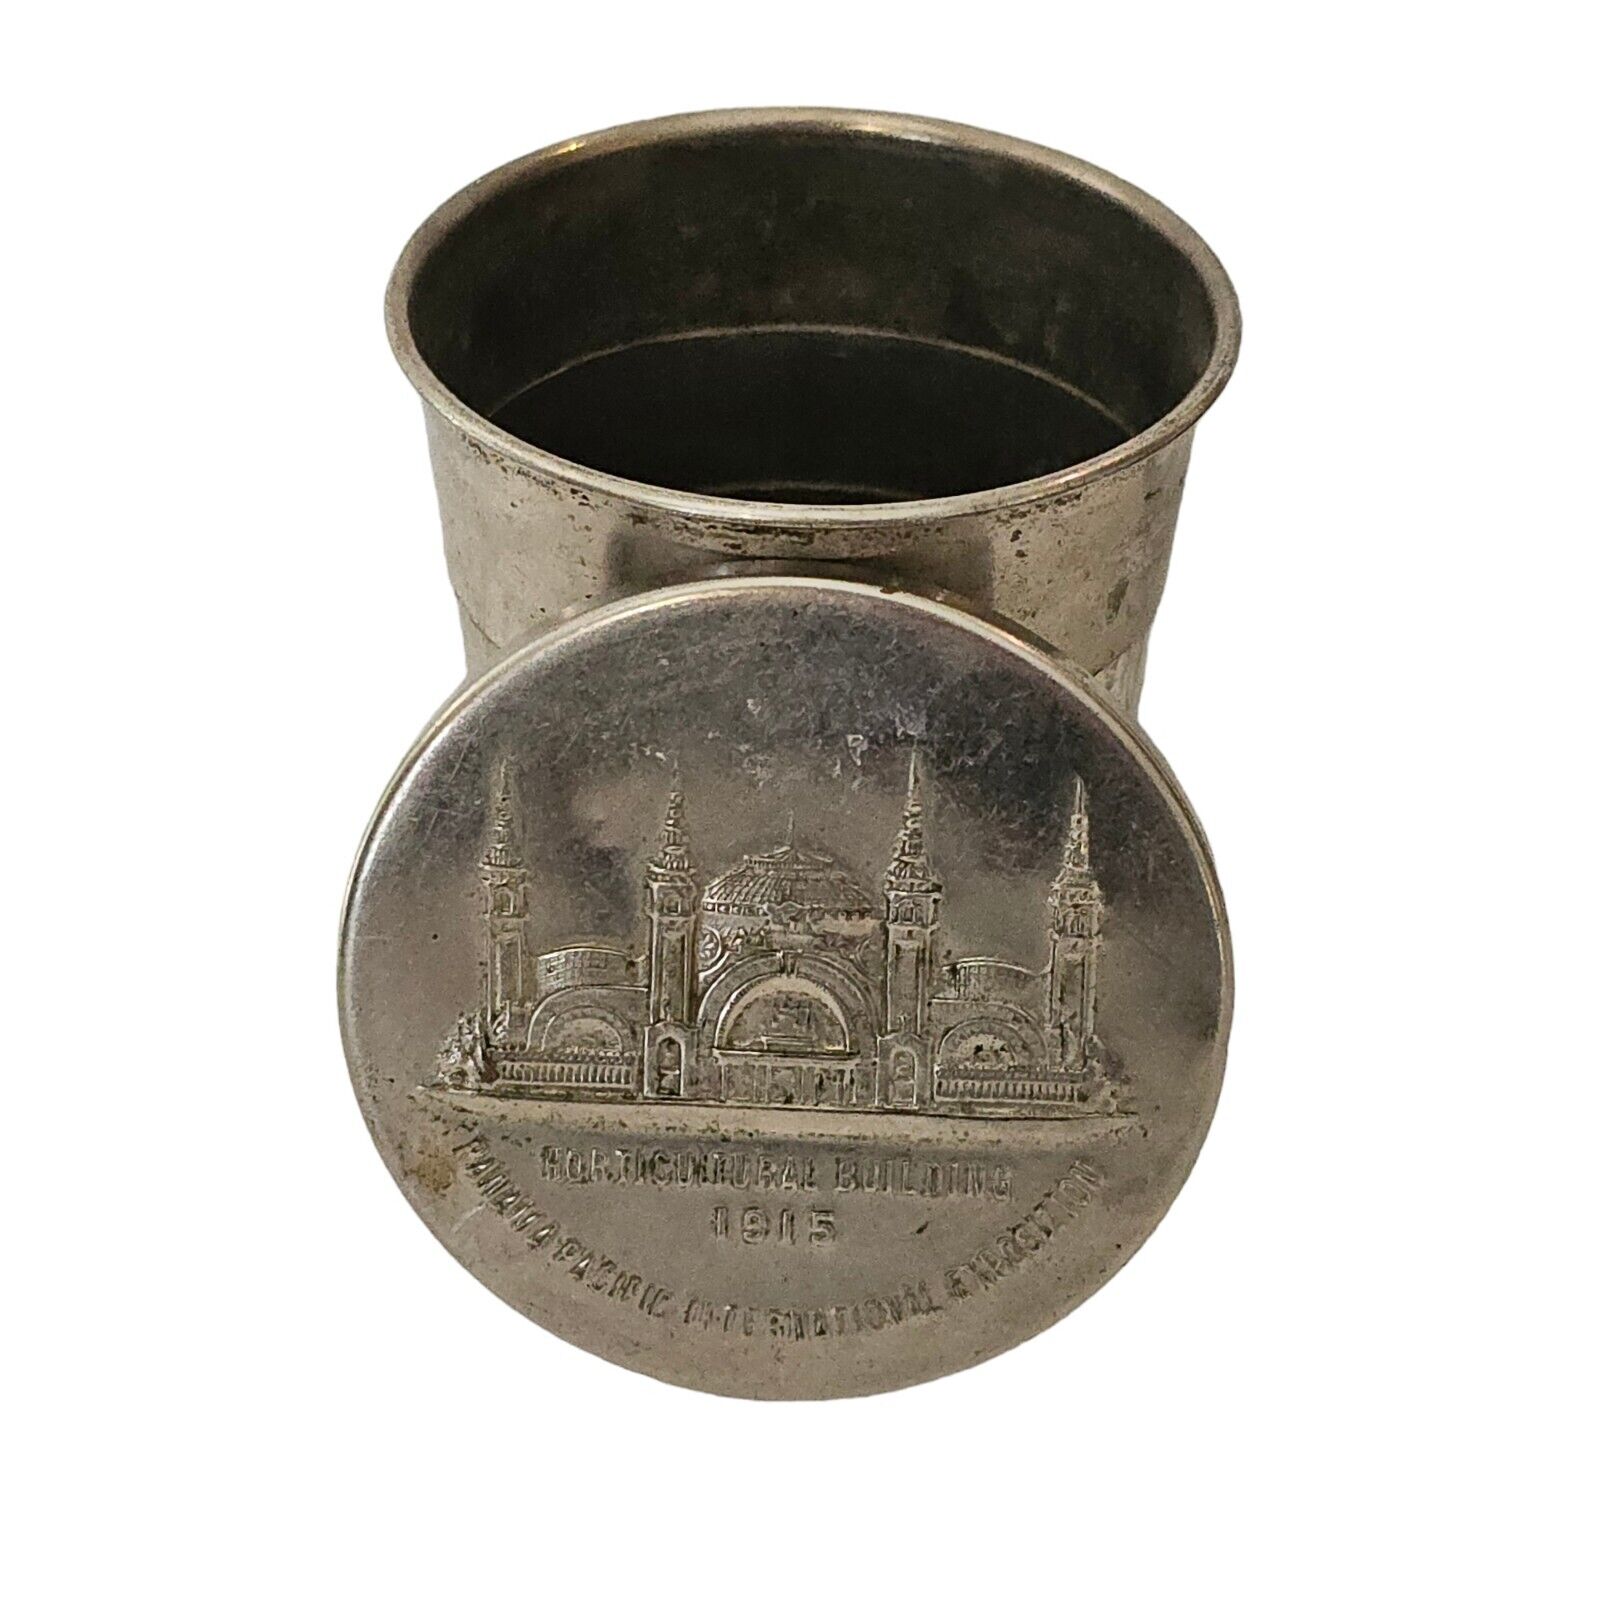 Panama Pacific International Exposition PPIE Horticultural Building 1915 Cup